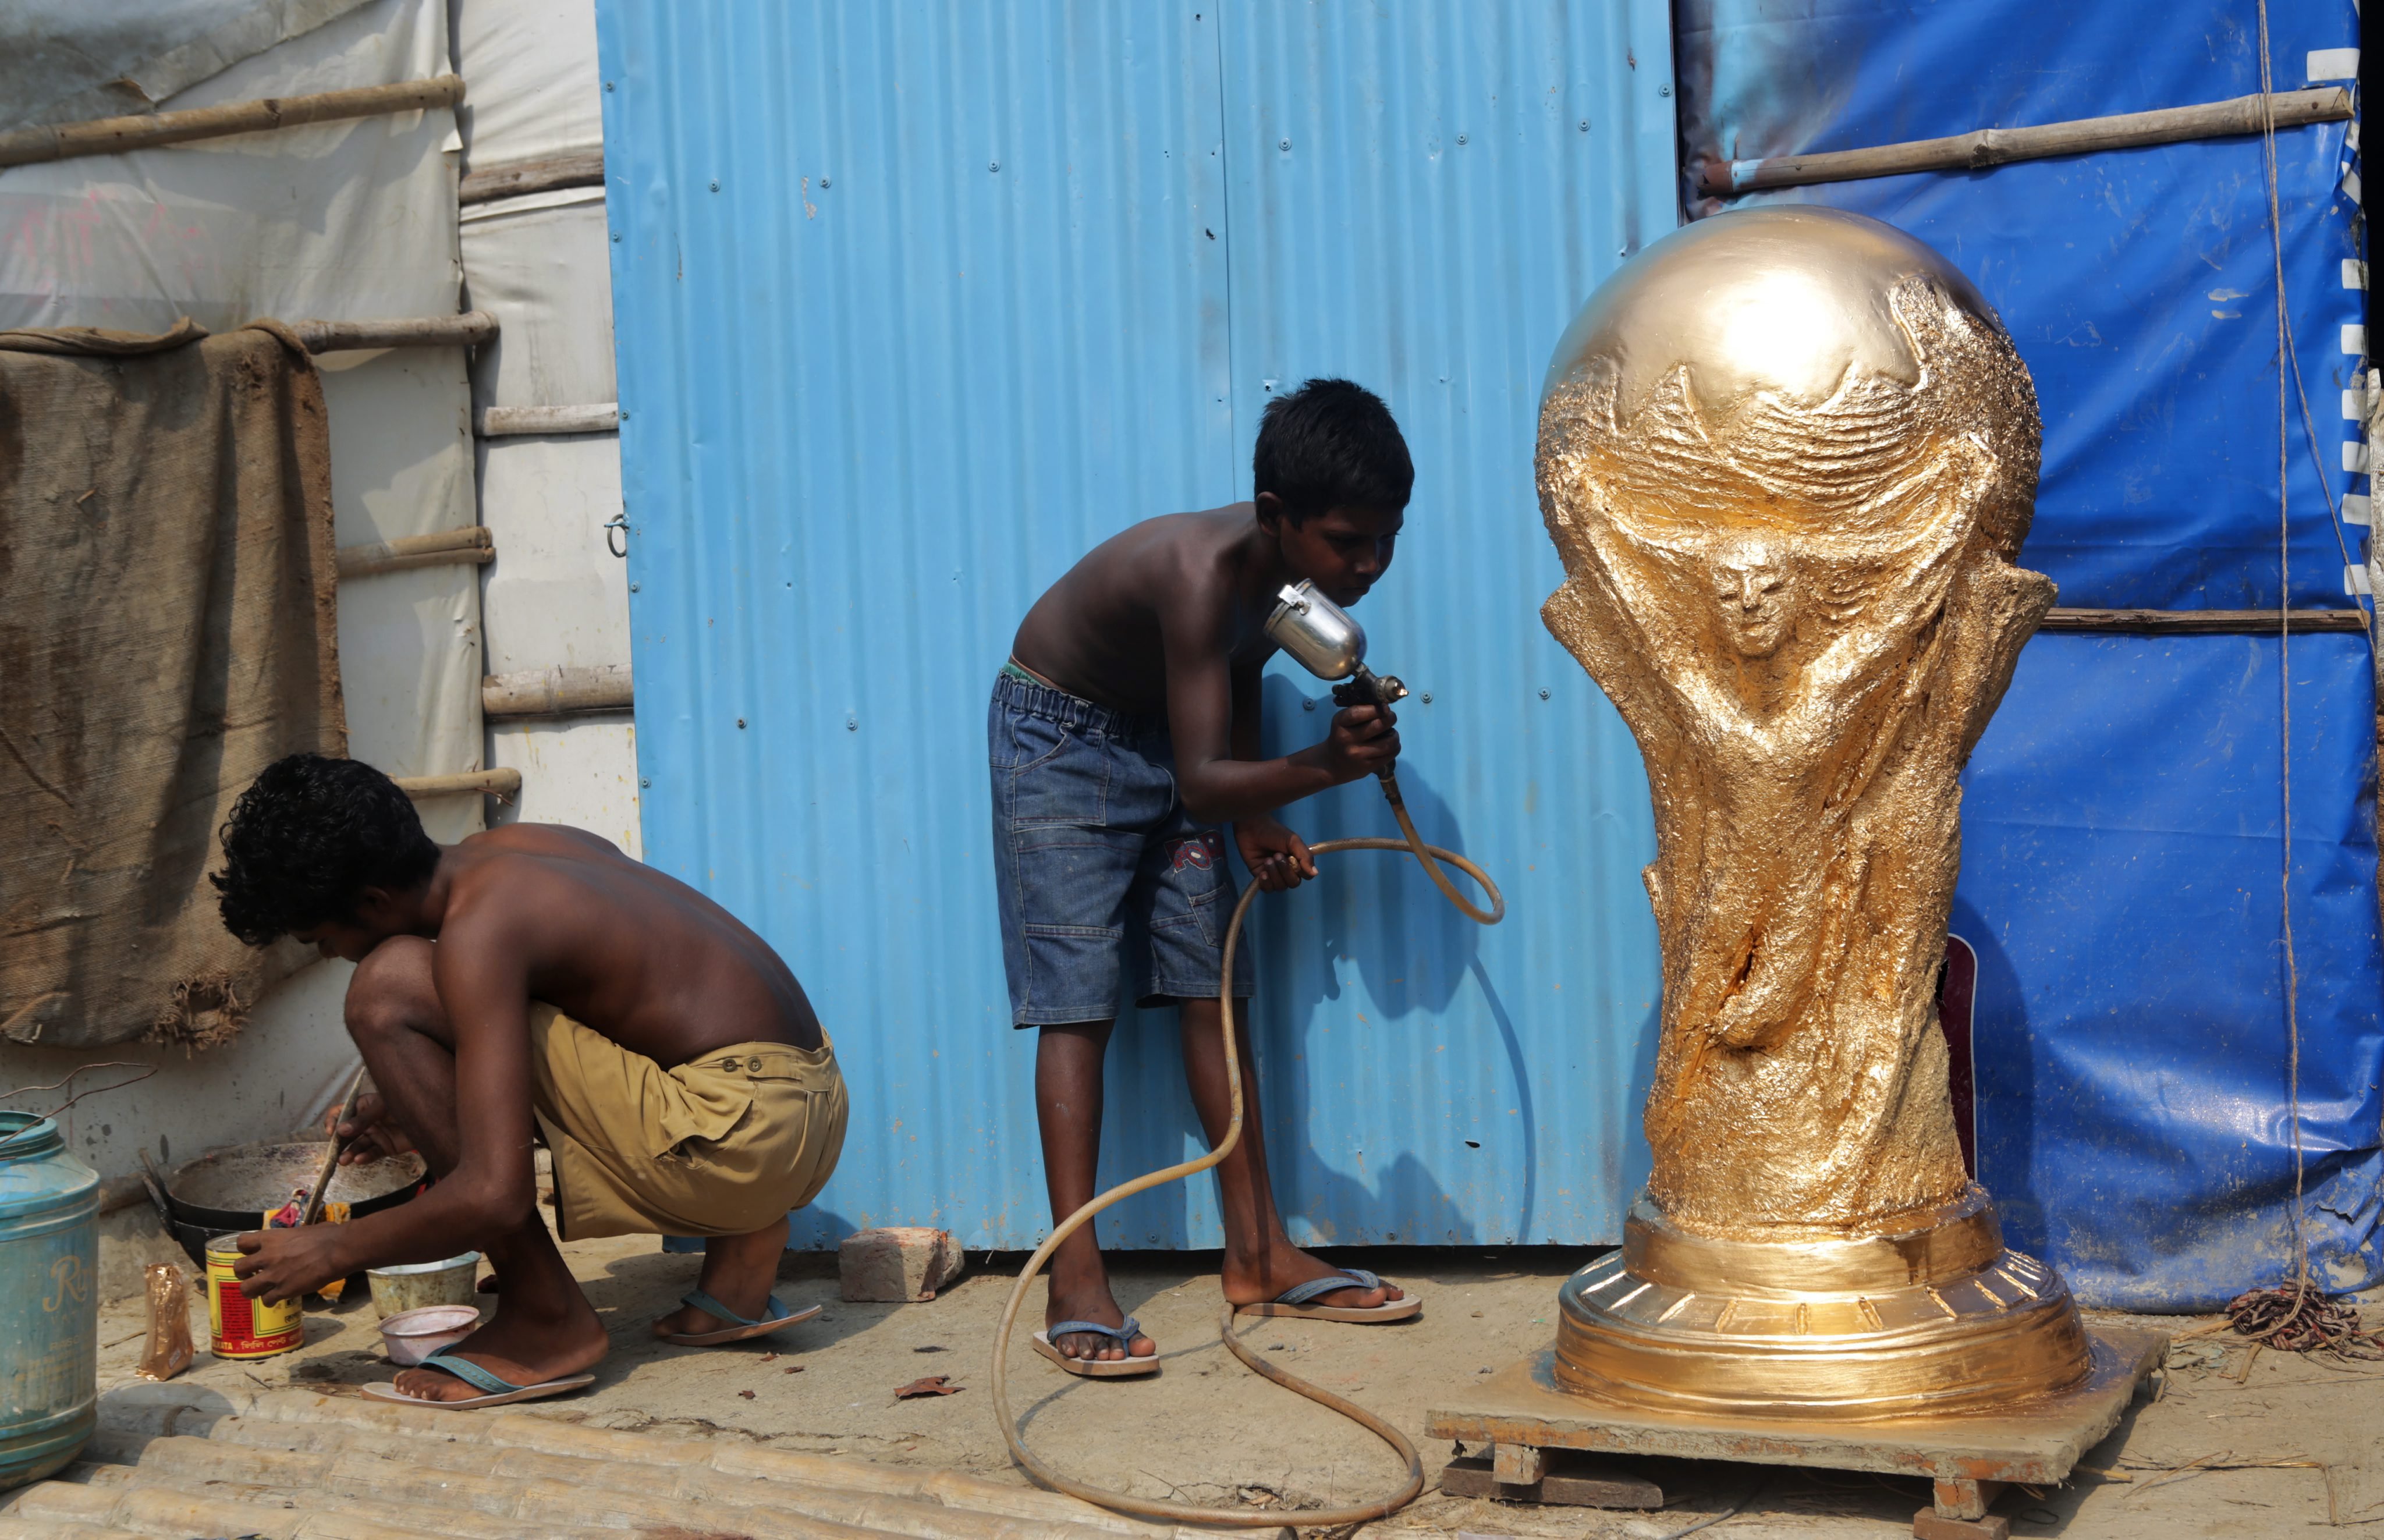 A young artist Kartik Das (C) applies color on a clay model of the FIFA World Cup trophy as a part of decoration for the forthcoming FIFA World Cup soccer tournament in Calcutta, India on June 9, 2014.